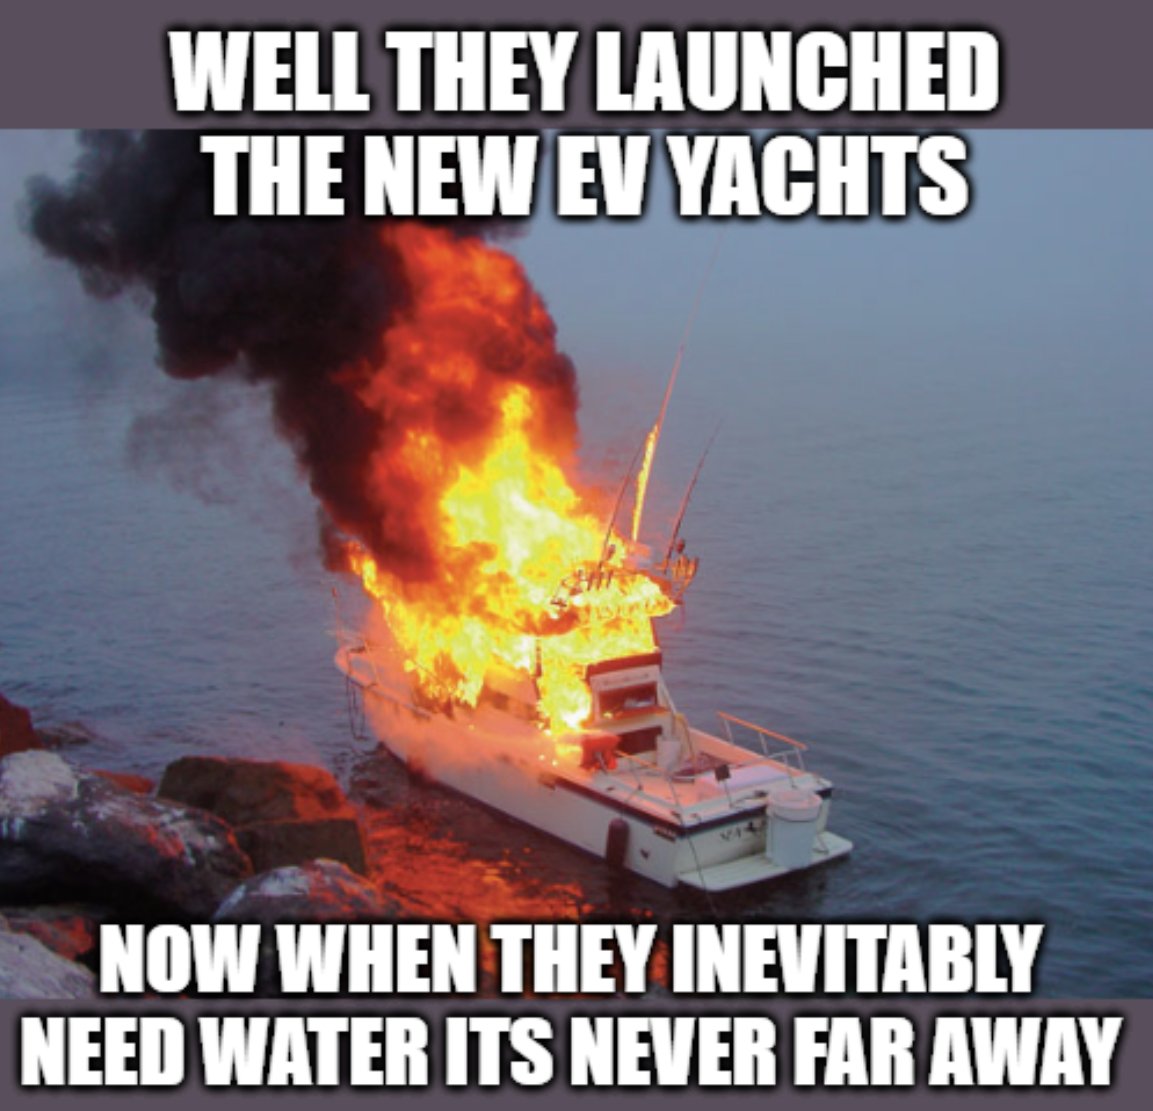 #Meme for #WEF, #EV #GreenEnergy loving #Alarmists 

Do you think this will make them so mad they will start to look like an #EVBattery and start spitting fire?